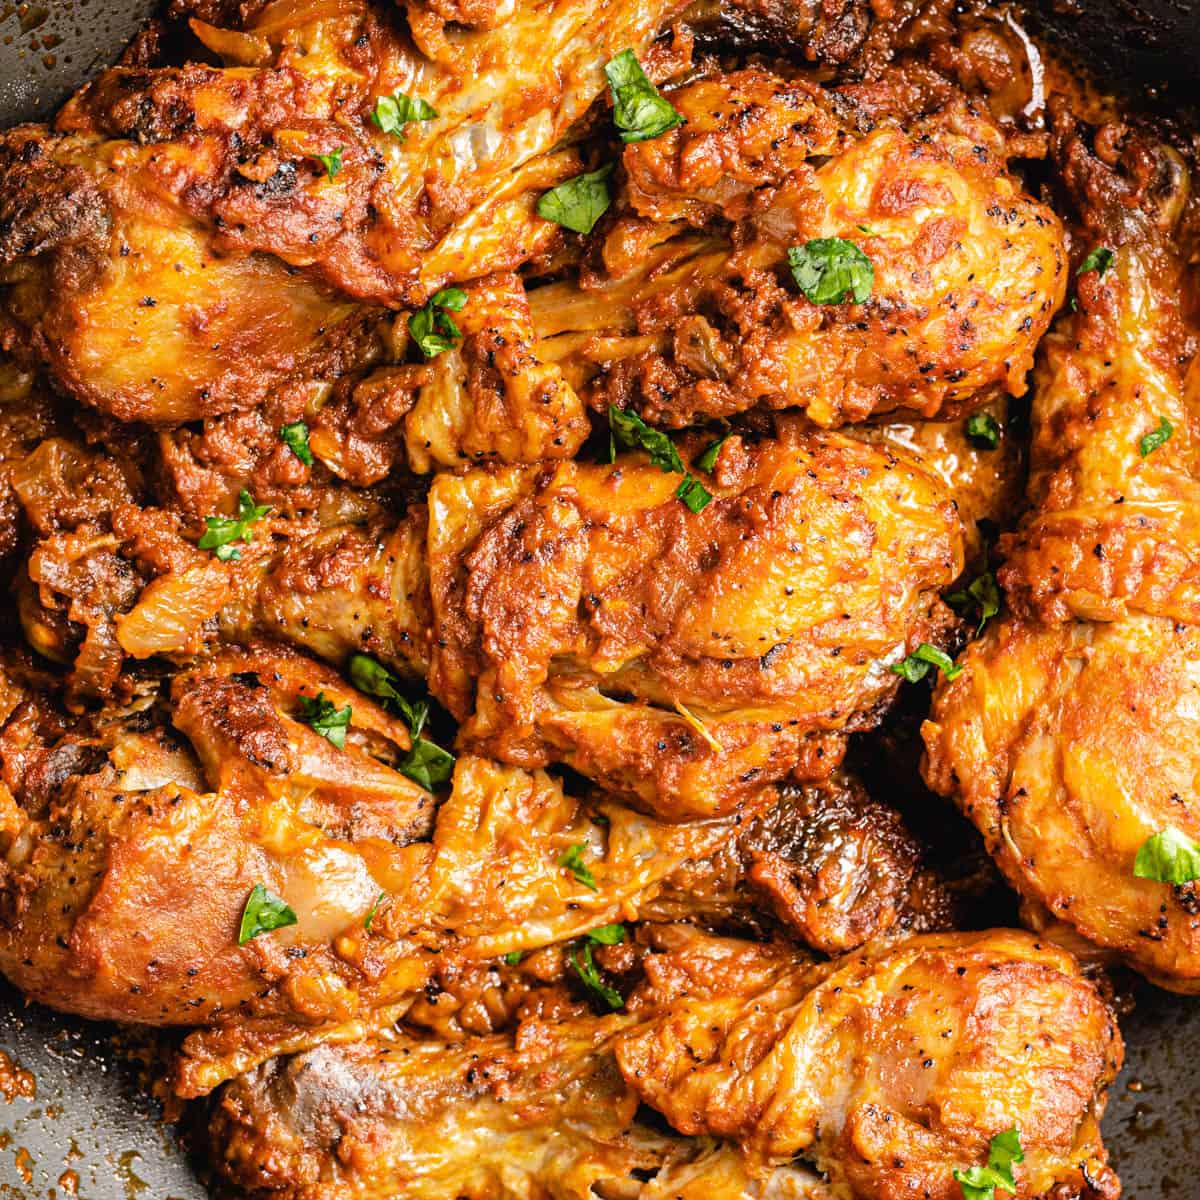 Moambe chicken (Poulet moambe)